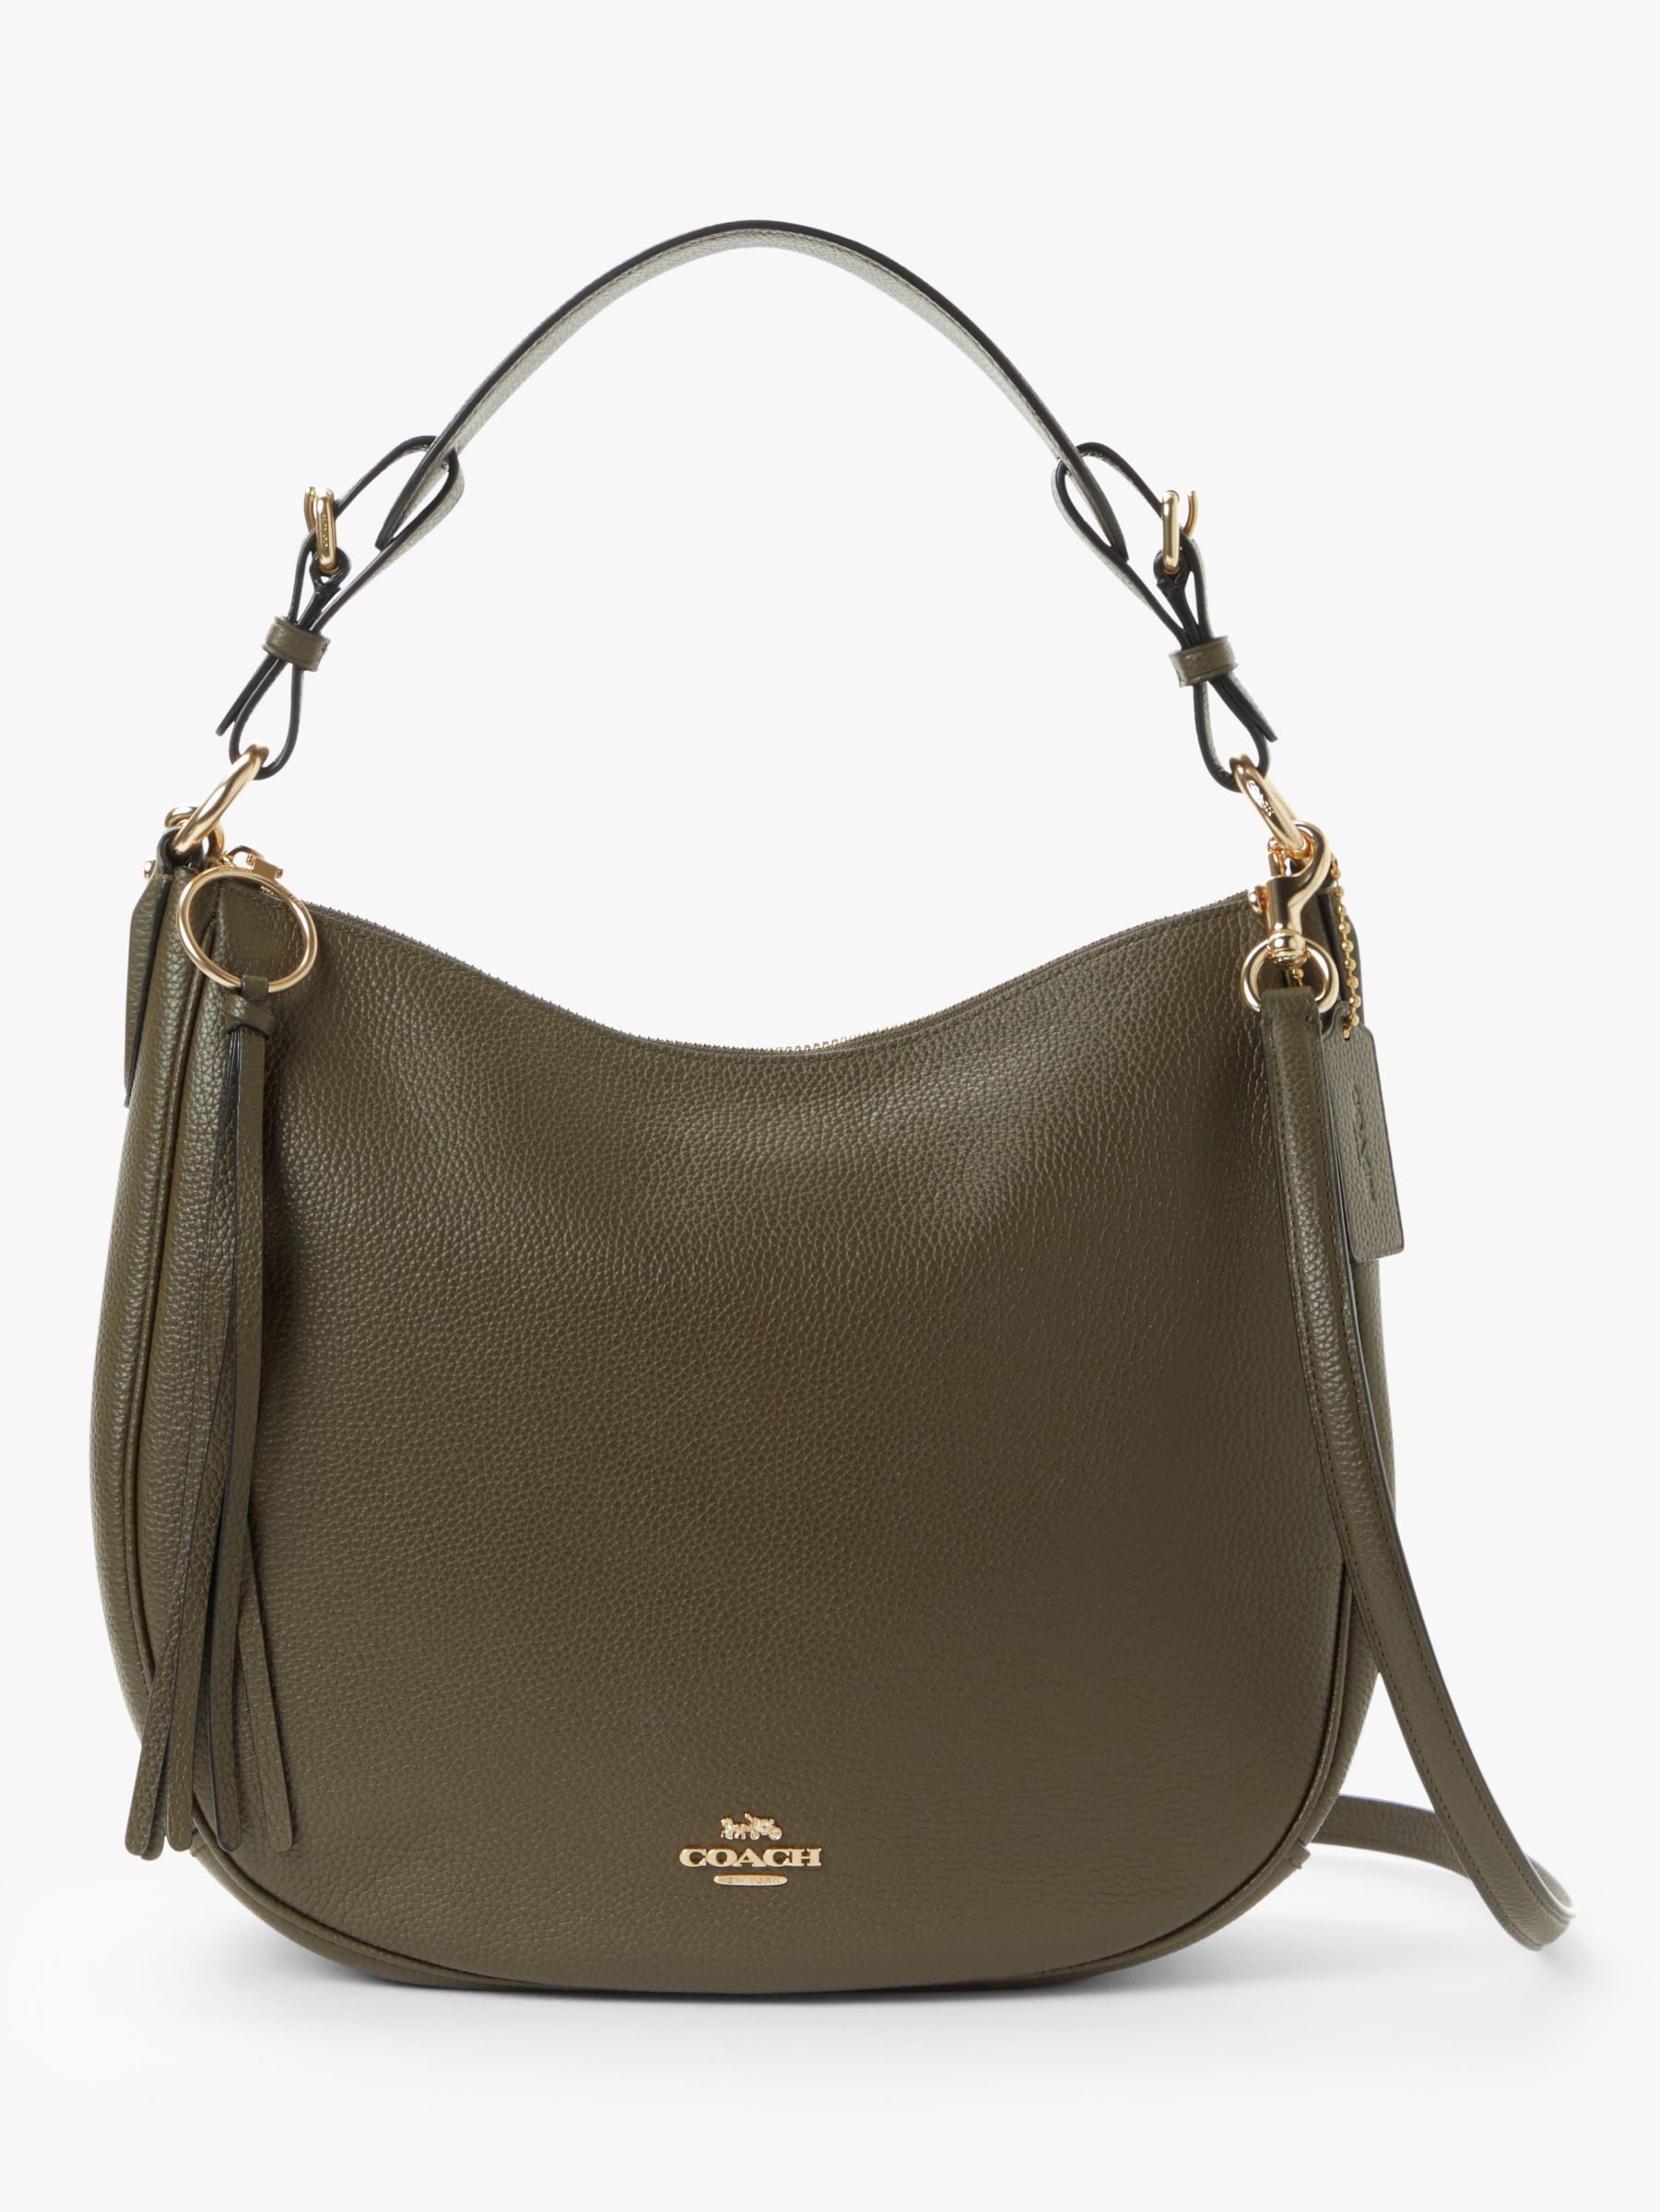 Coach Sutton Pebbled Leather Hobo Bag at John Lewis & Partners